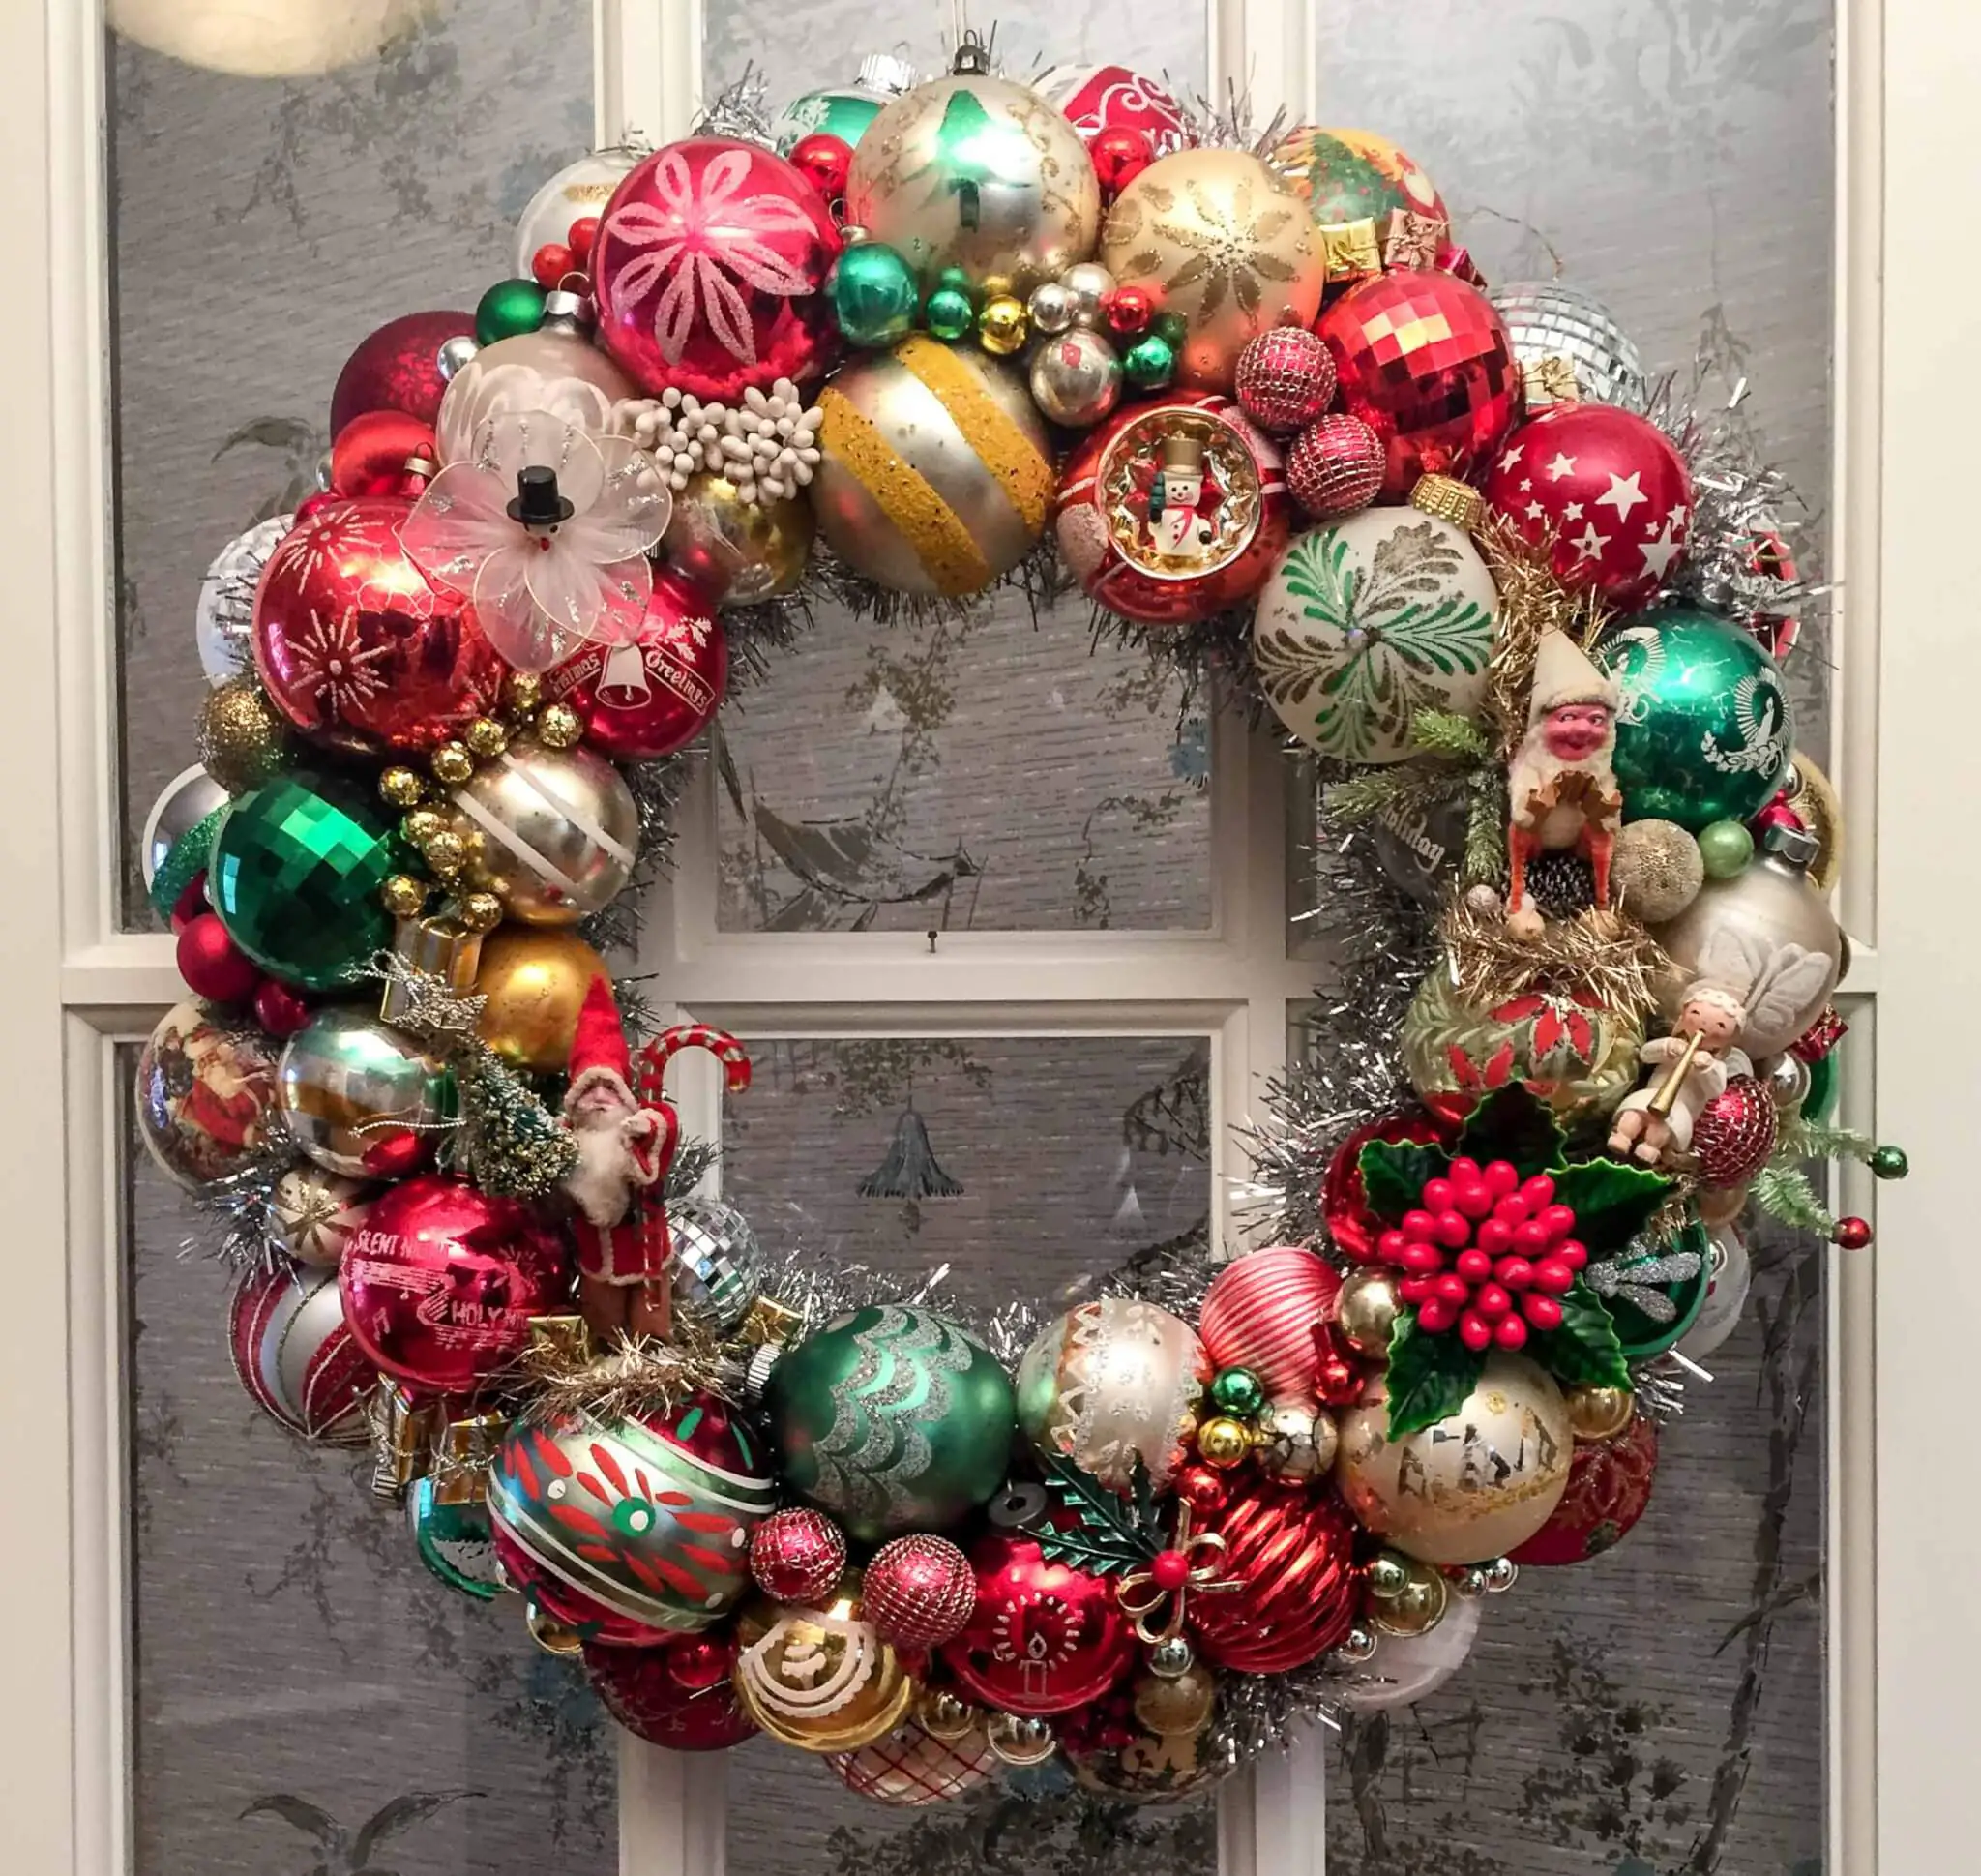 How to Make a Christmas Wreath Step by Step, Simple Guide